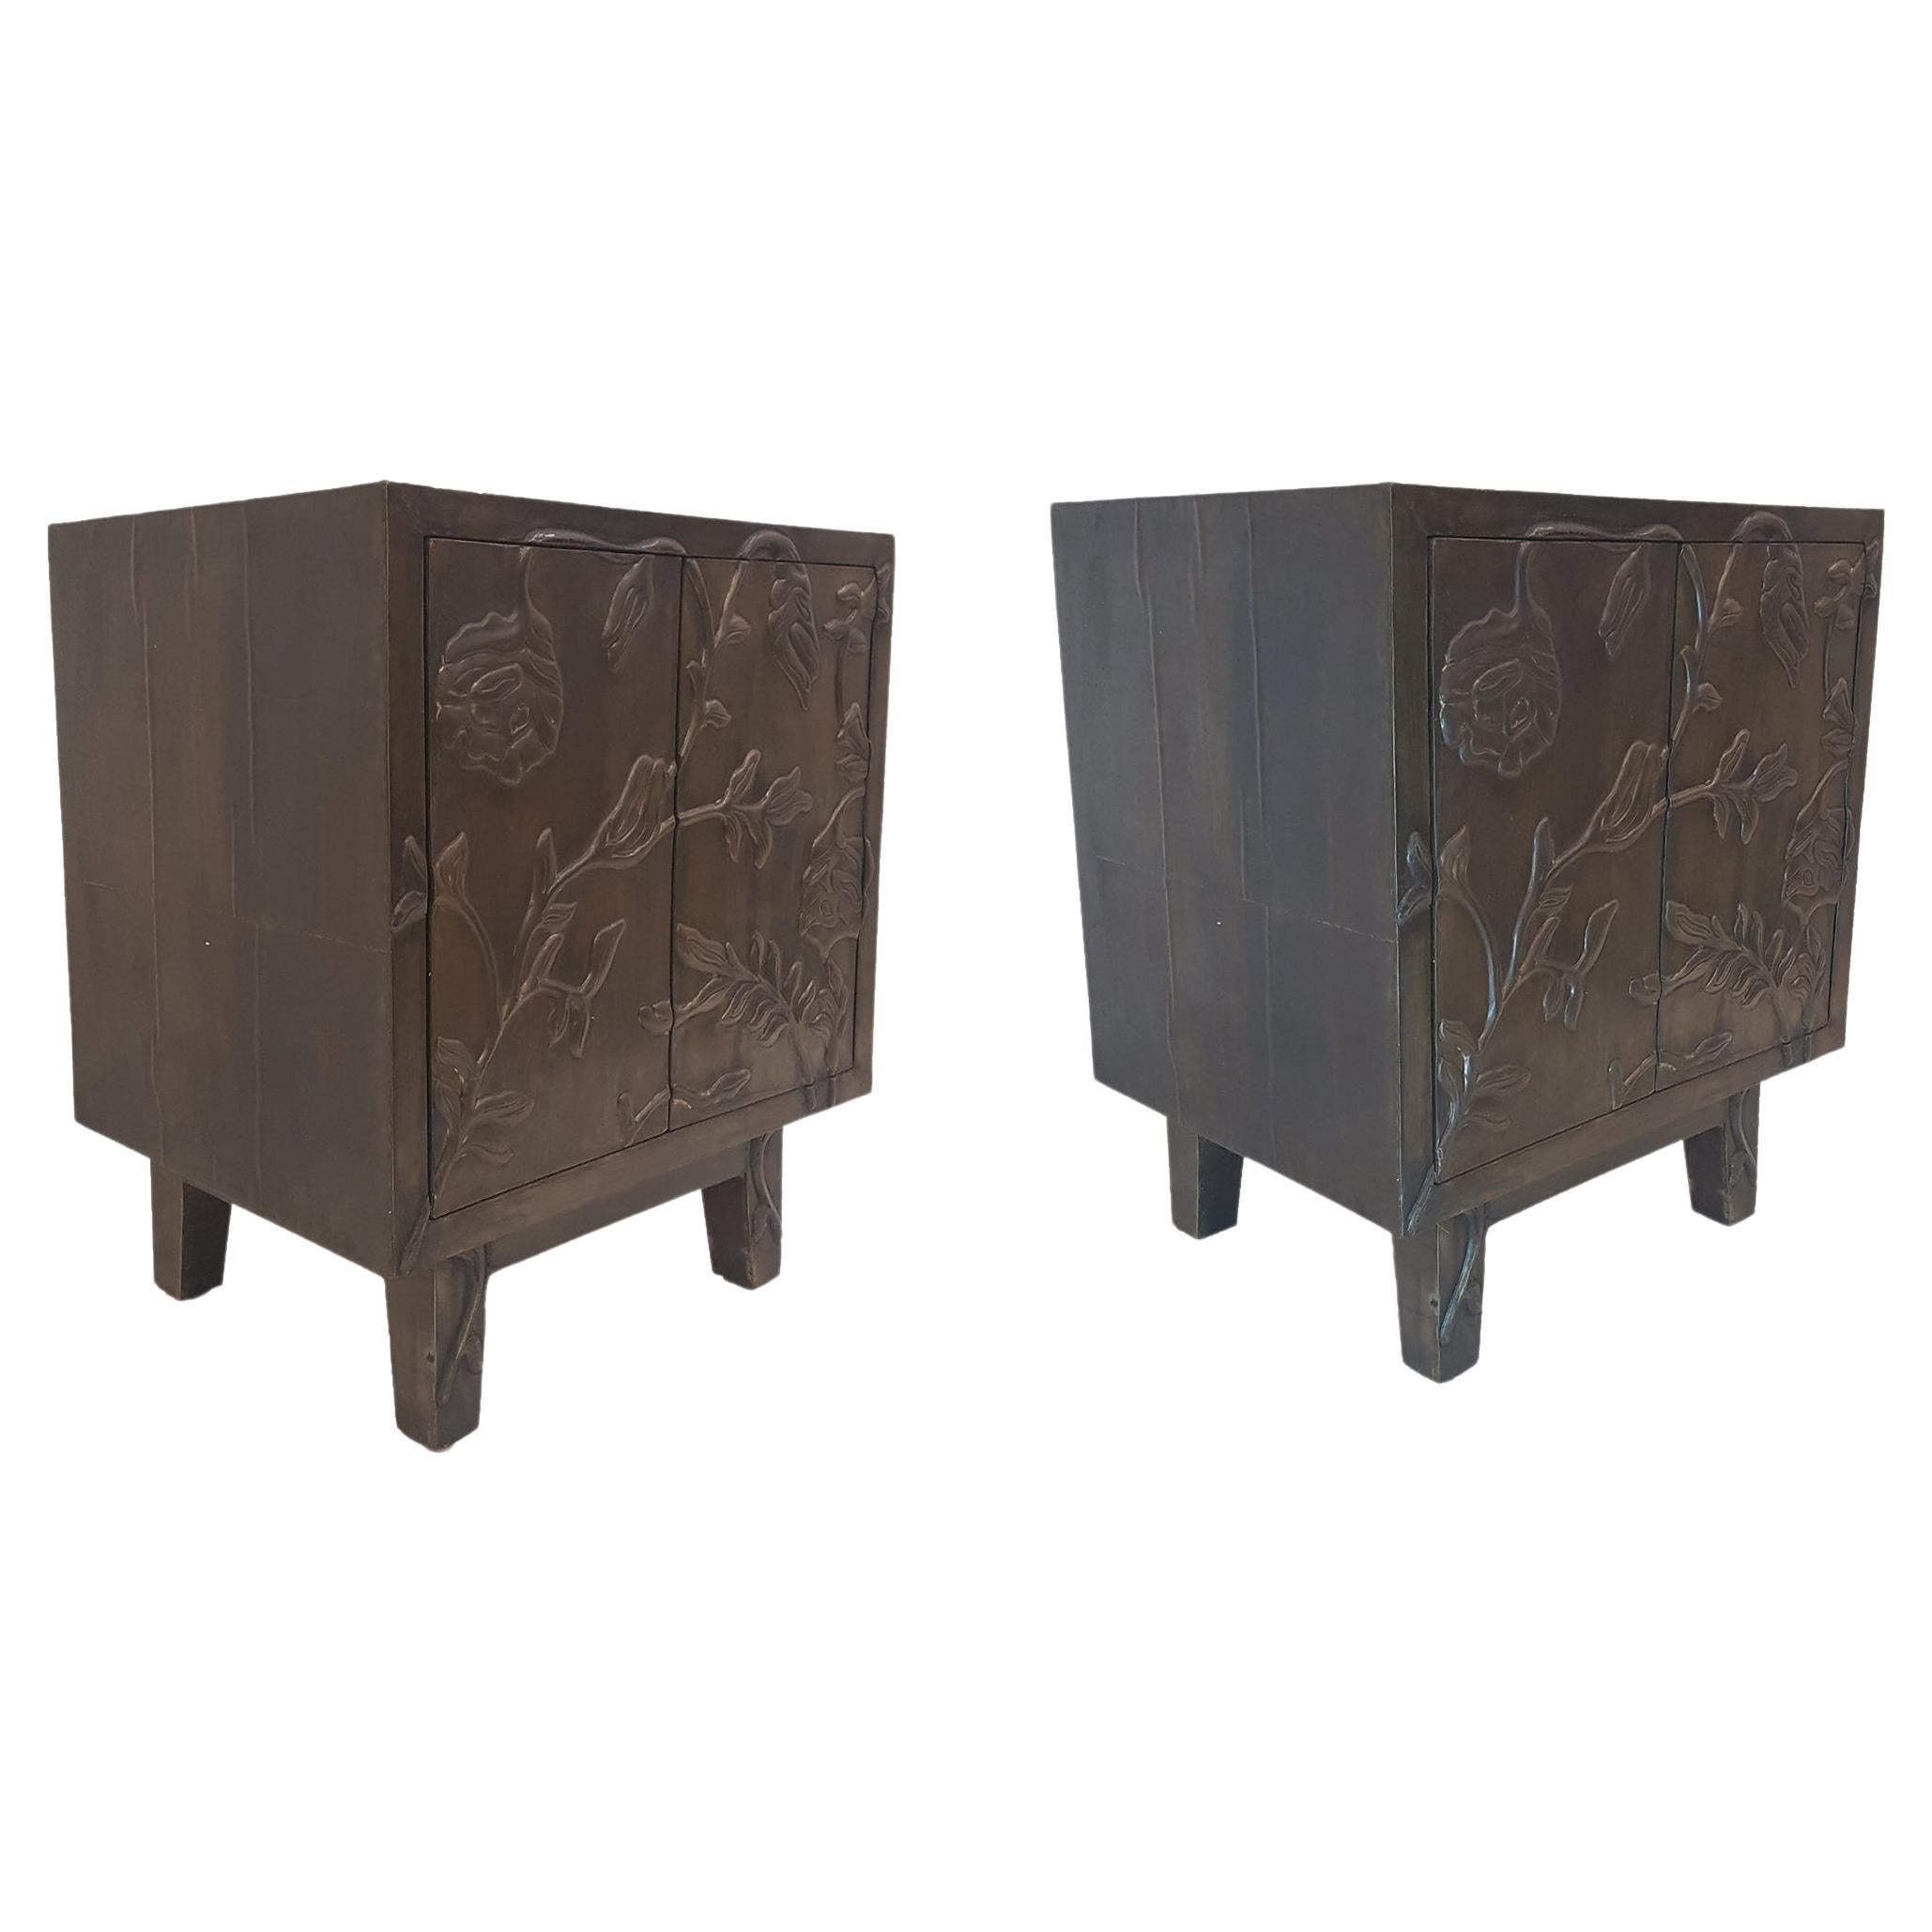 Set of Two Floral Nightstands Hand Hammered in Antiqued White Bronze